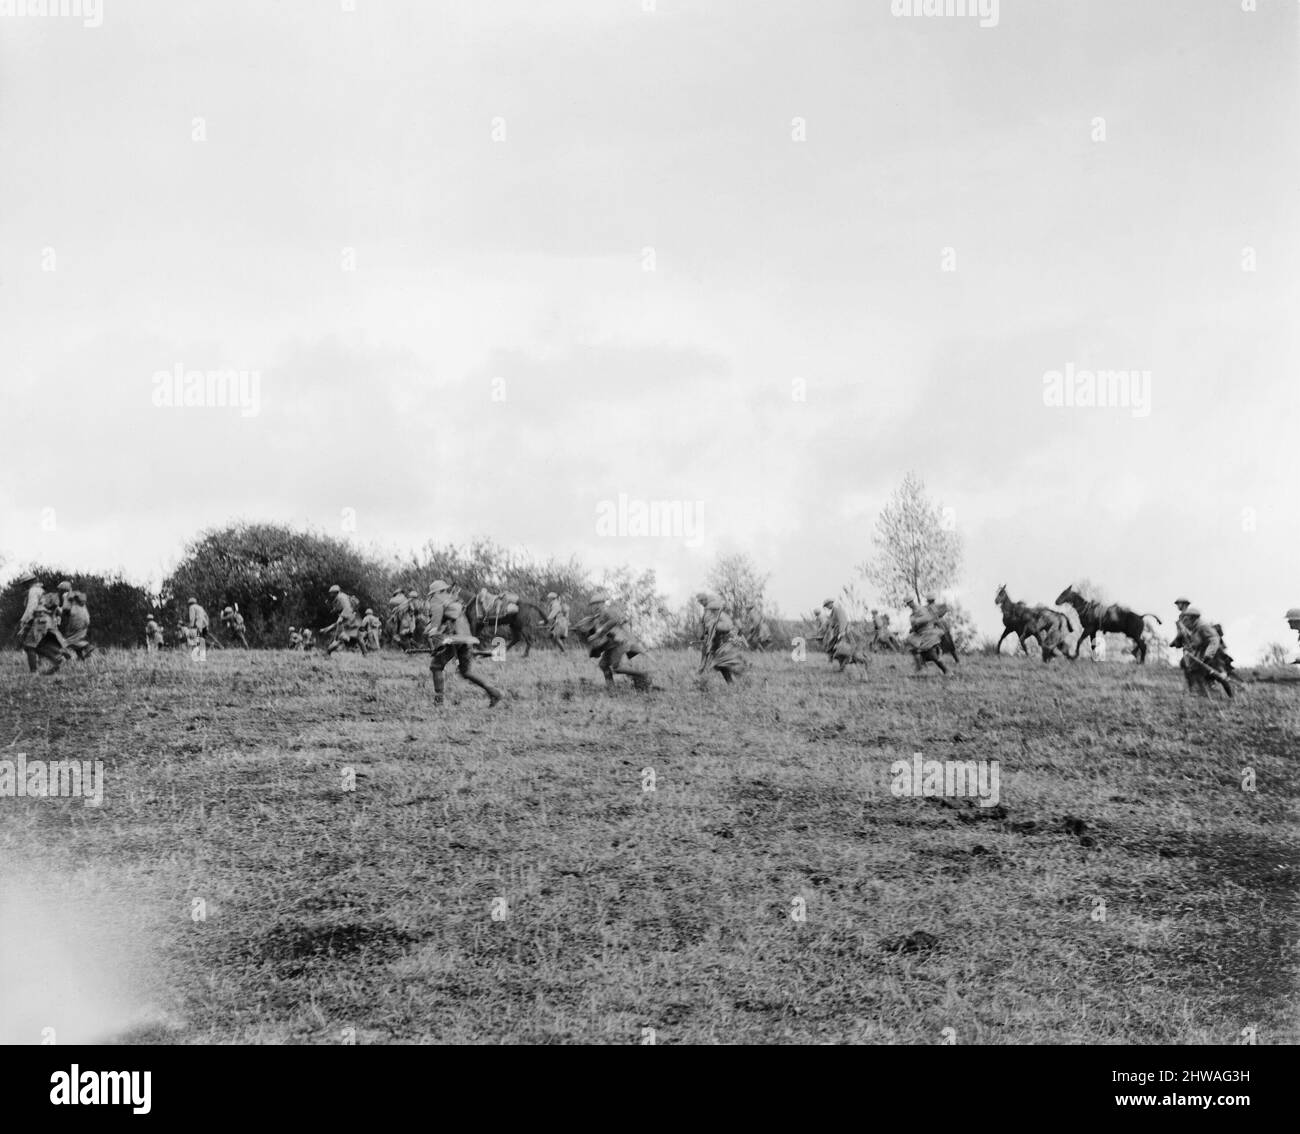 Troops of the American 30th Infantry Division moving forward during their advance on the village of Premont, 8 October 1918 during the Hundred Days Offensive at the Battle of Cambrai. Stock Photo